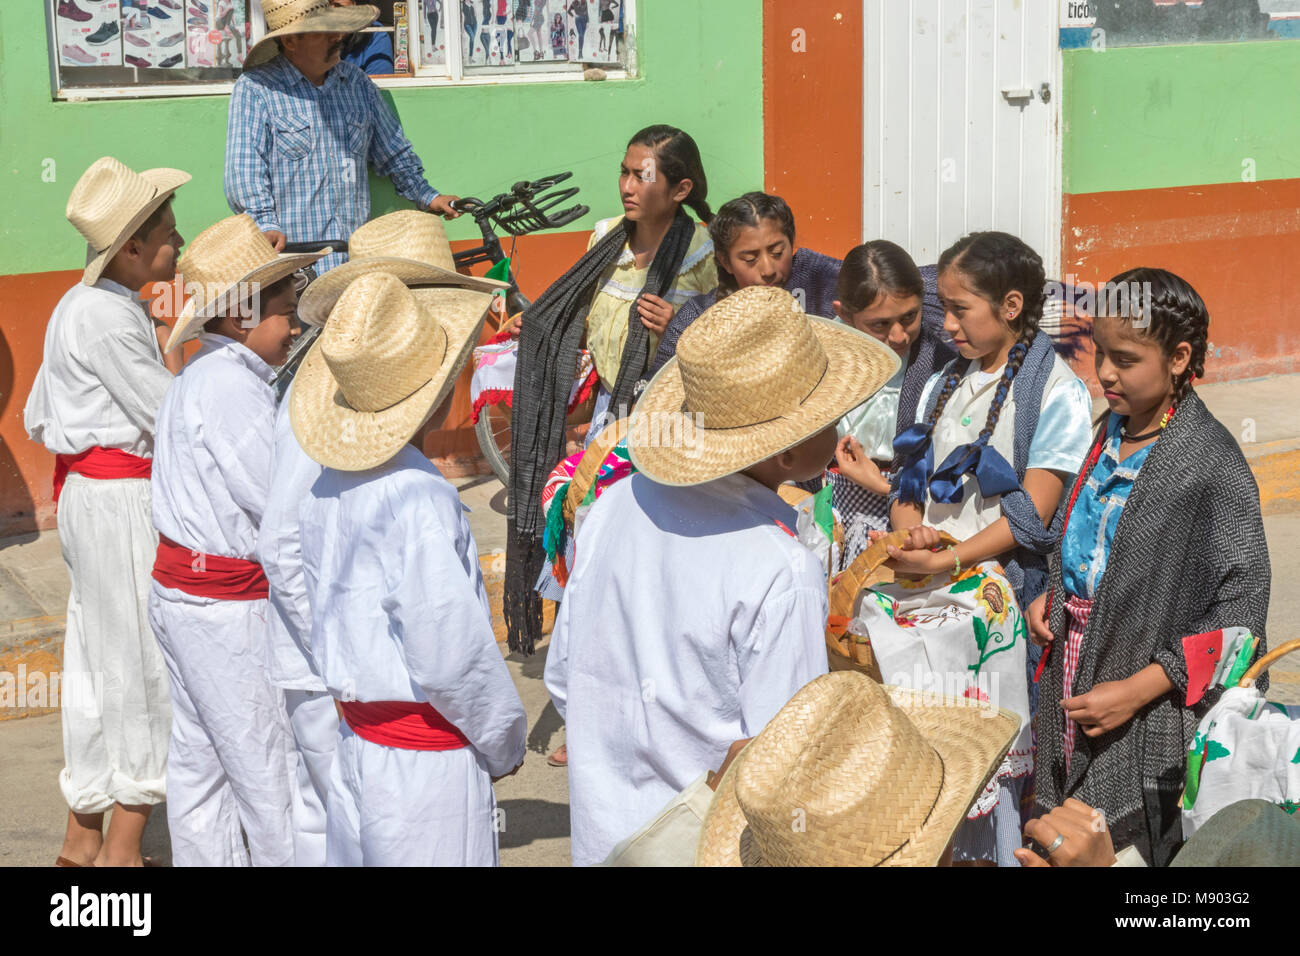 San Juan Teitipac, Oaxaca, Mexico - A brass band and dancers in traditional dress led a parade around the village during the Linguistic and Heritage F Stock Photo